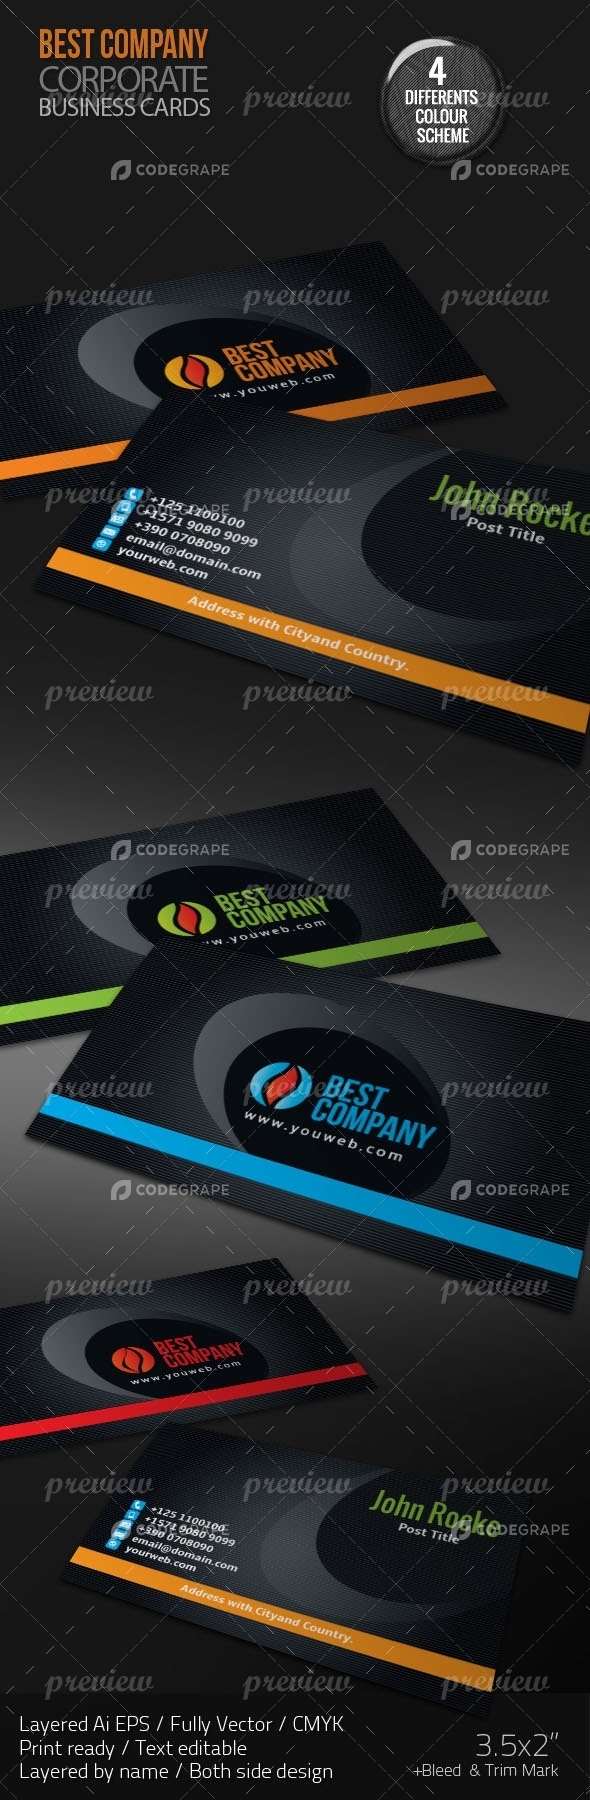 Best Company Corporate Business Card